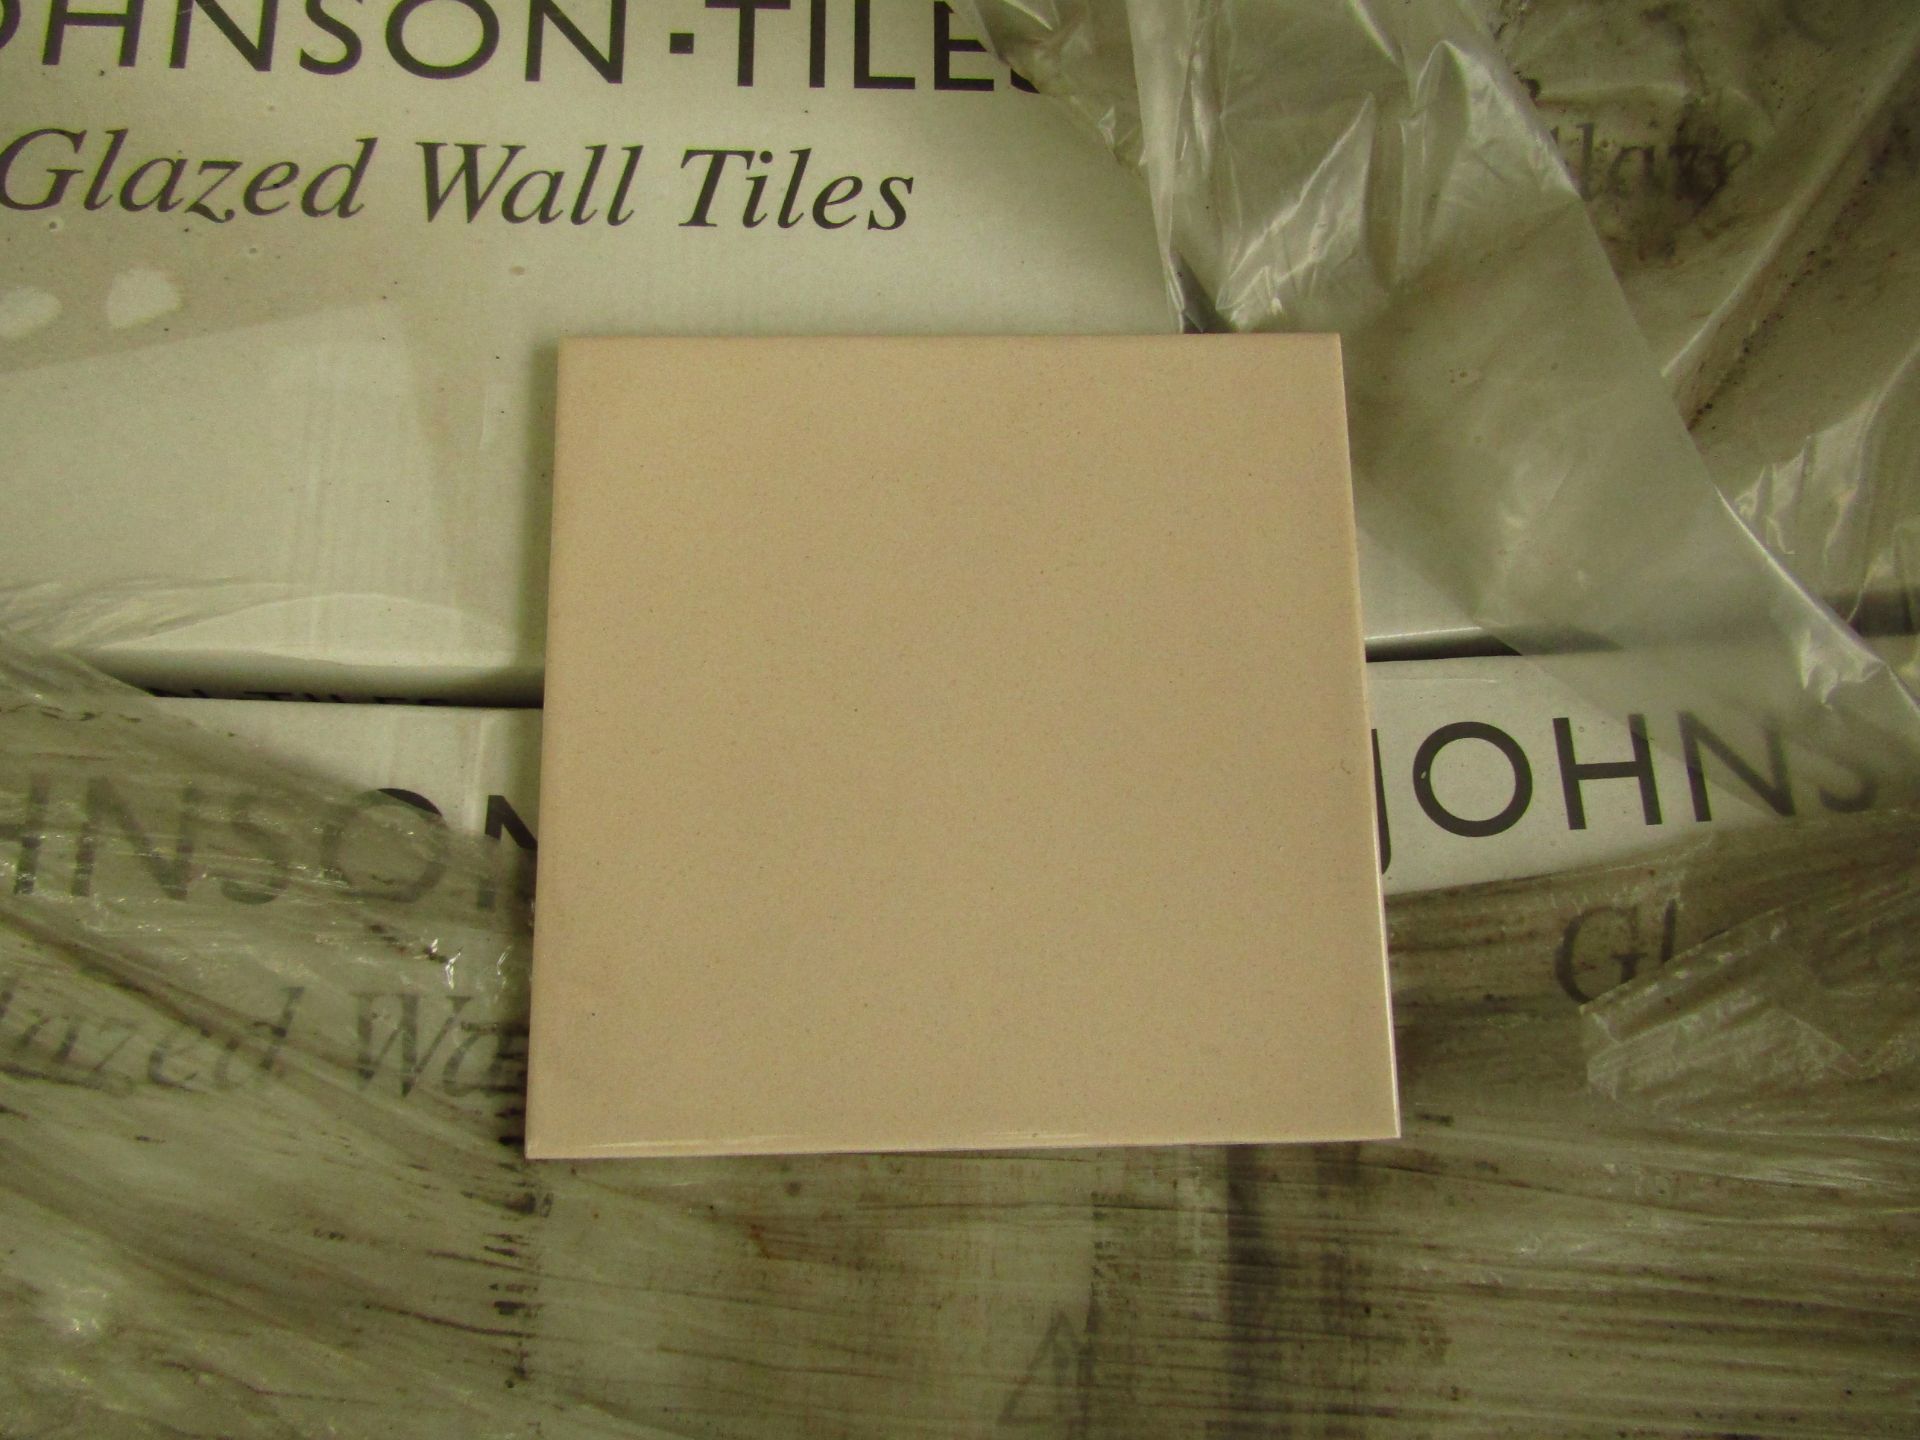 90x packs of 44 Barley 150 x 150 Glazed wall tiles (1515SPL04044), new, RRP £14.99 a pack giving a